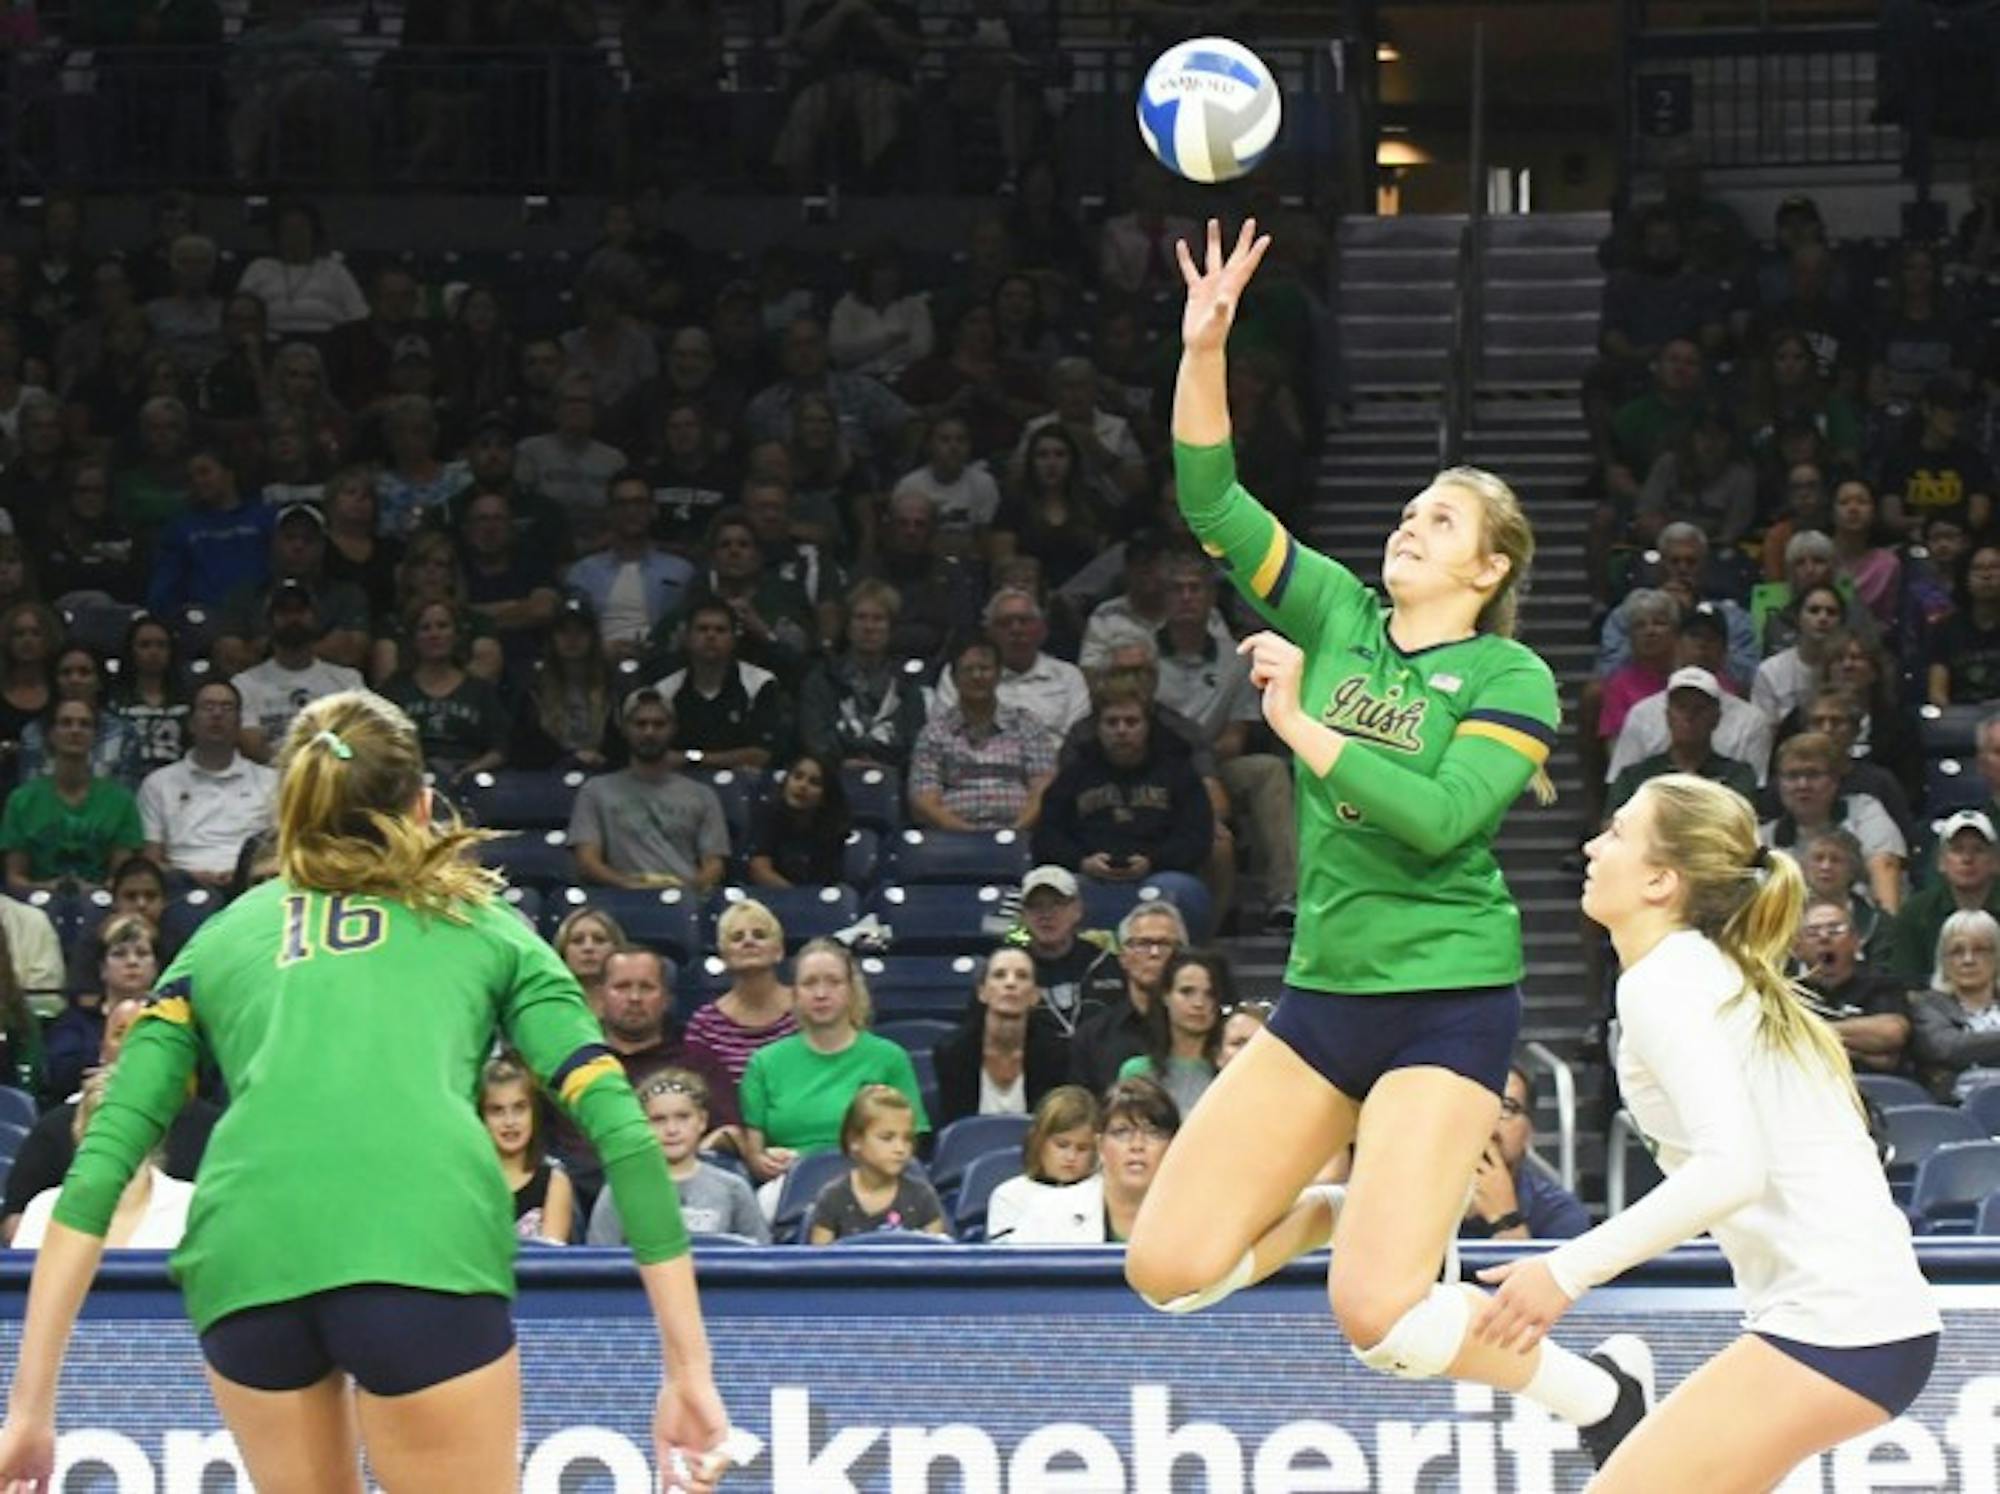 Irish junior outside hitter Rebecca Nunge tips the ball during Notre Dame's 3-0 win over Michigan State at Purcell Pavilion on Sept. 15.